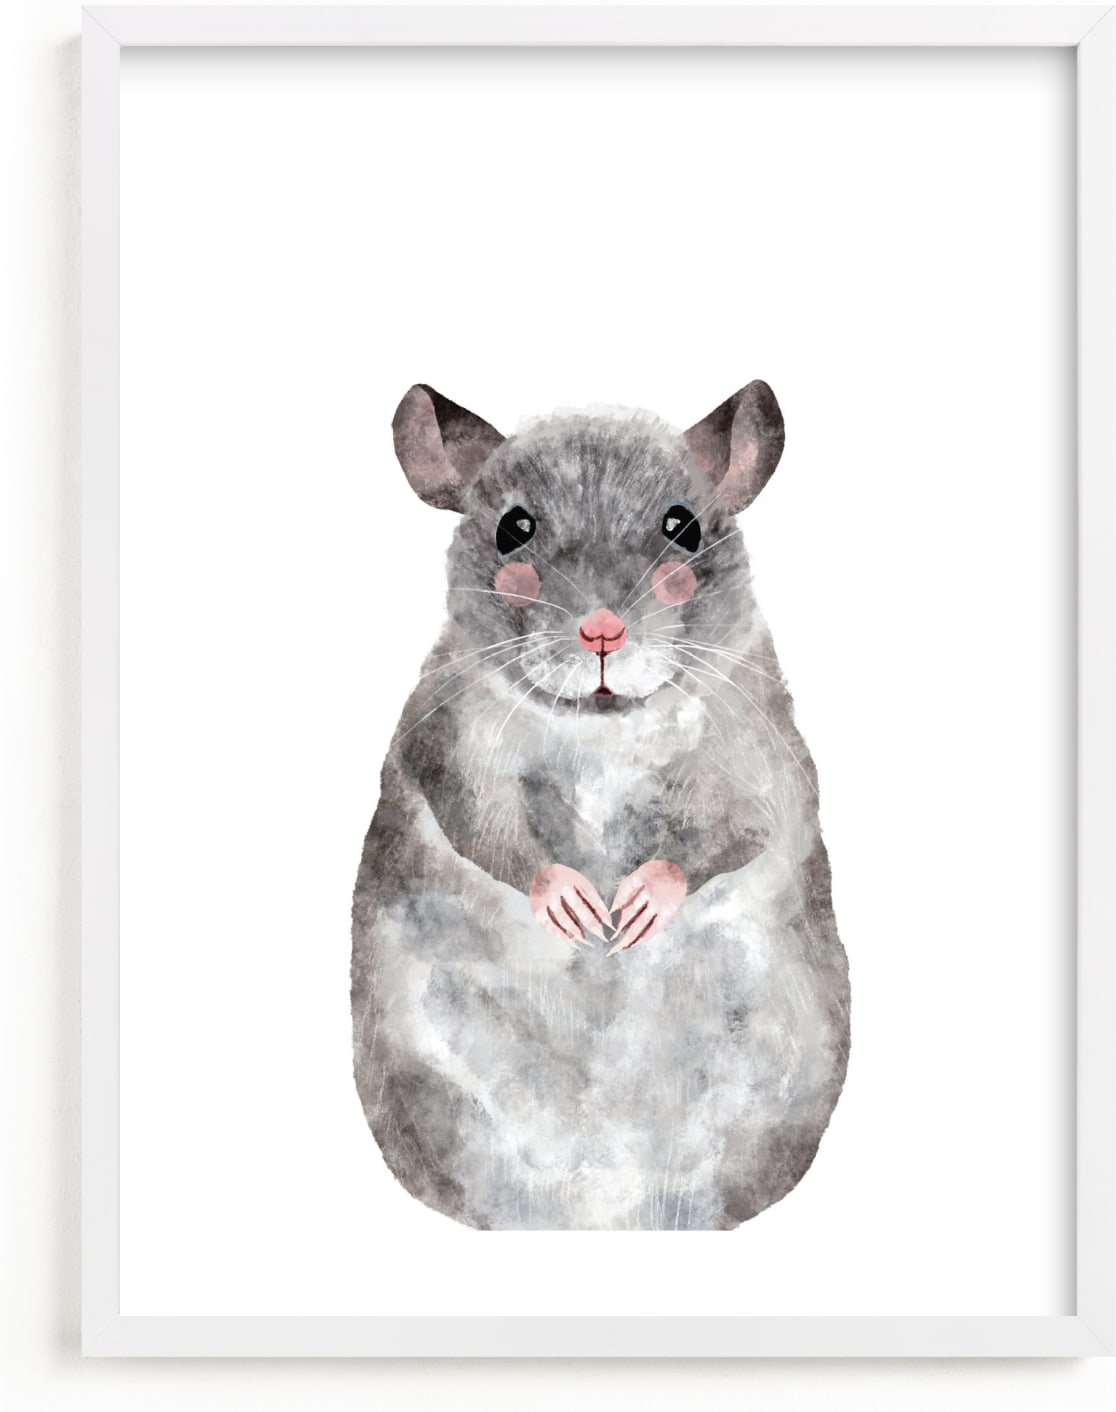 This is a grey art by Cass Loh called Baby Animal Rat.